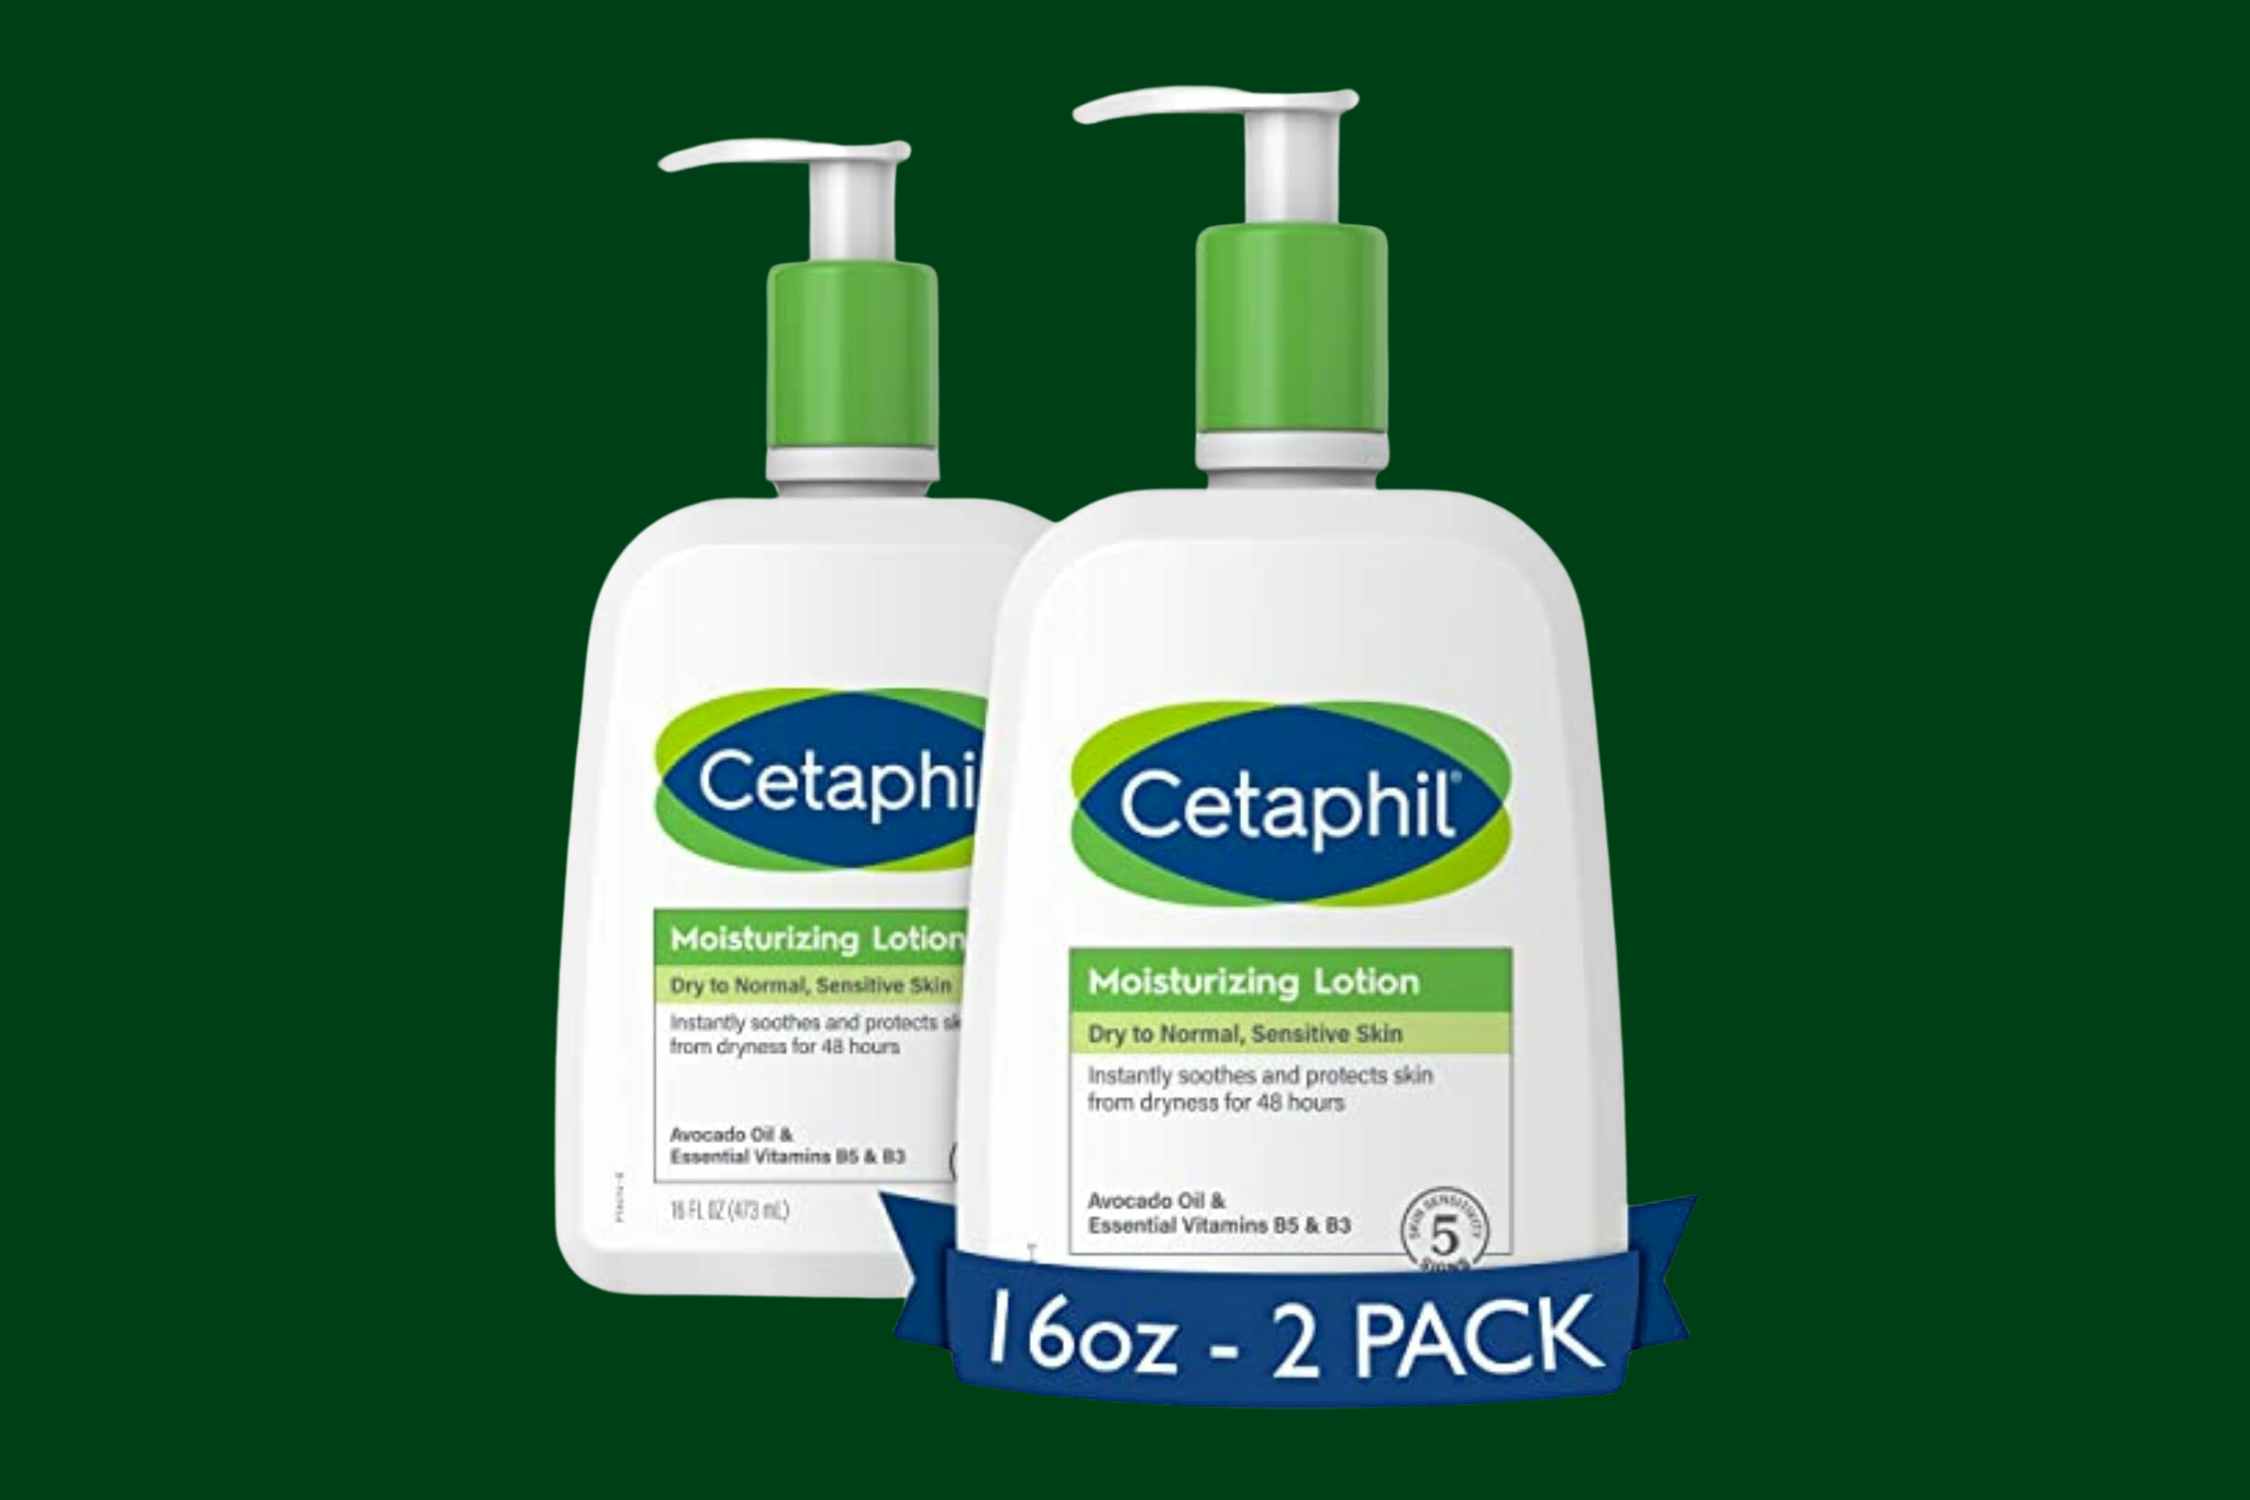 Cetaphil Face and Body Moisturizing Lotion 2-Pack, Now $9.59 on Amazon